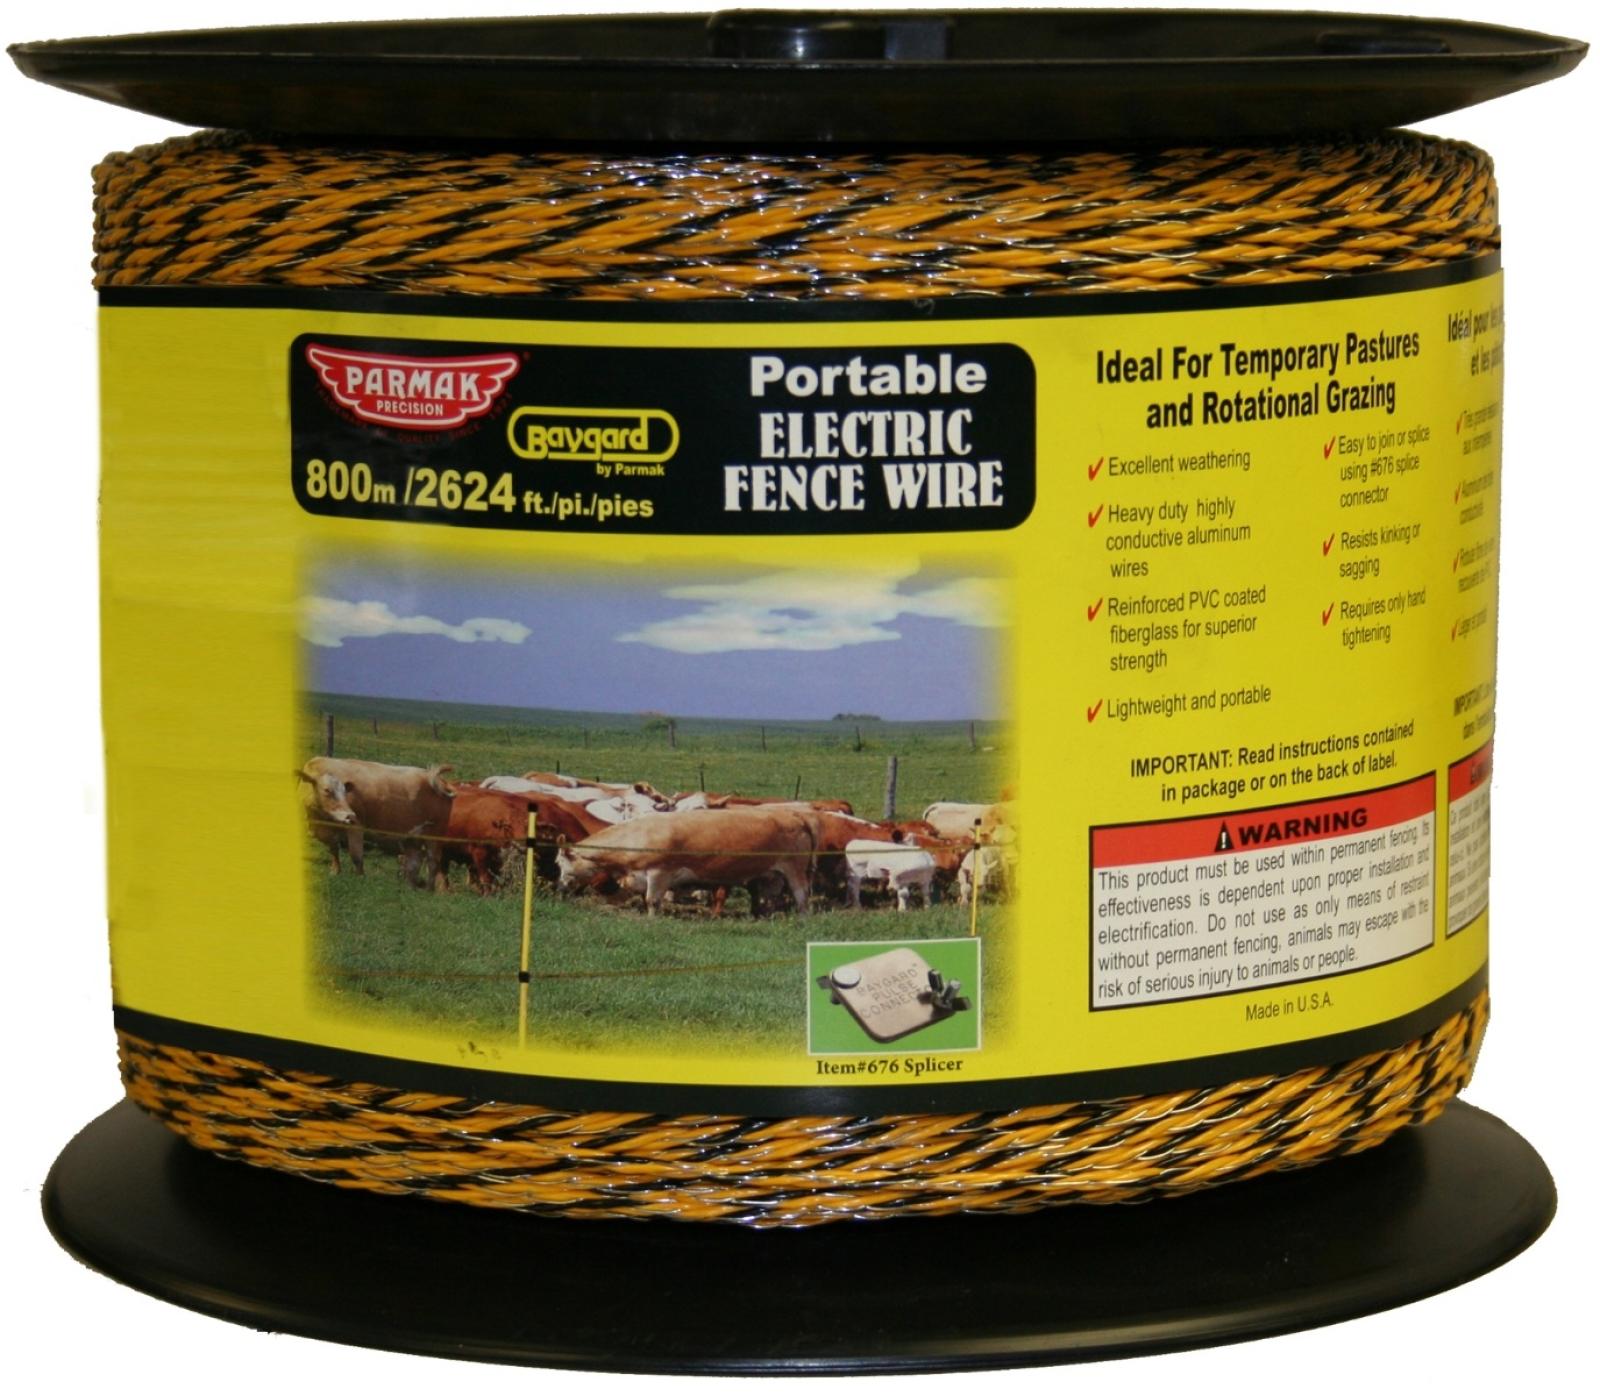 Parmak Baygard Electric Fence Wire 800m/2624ft